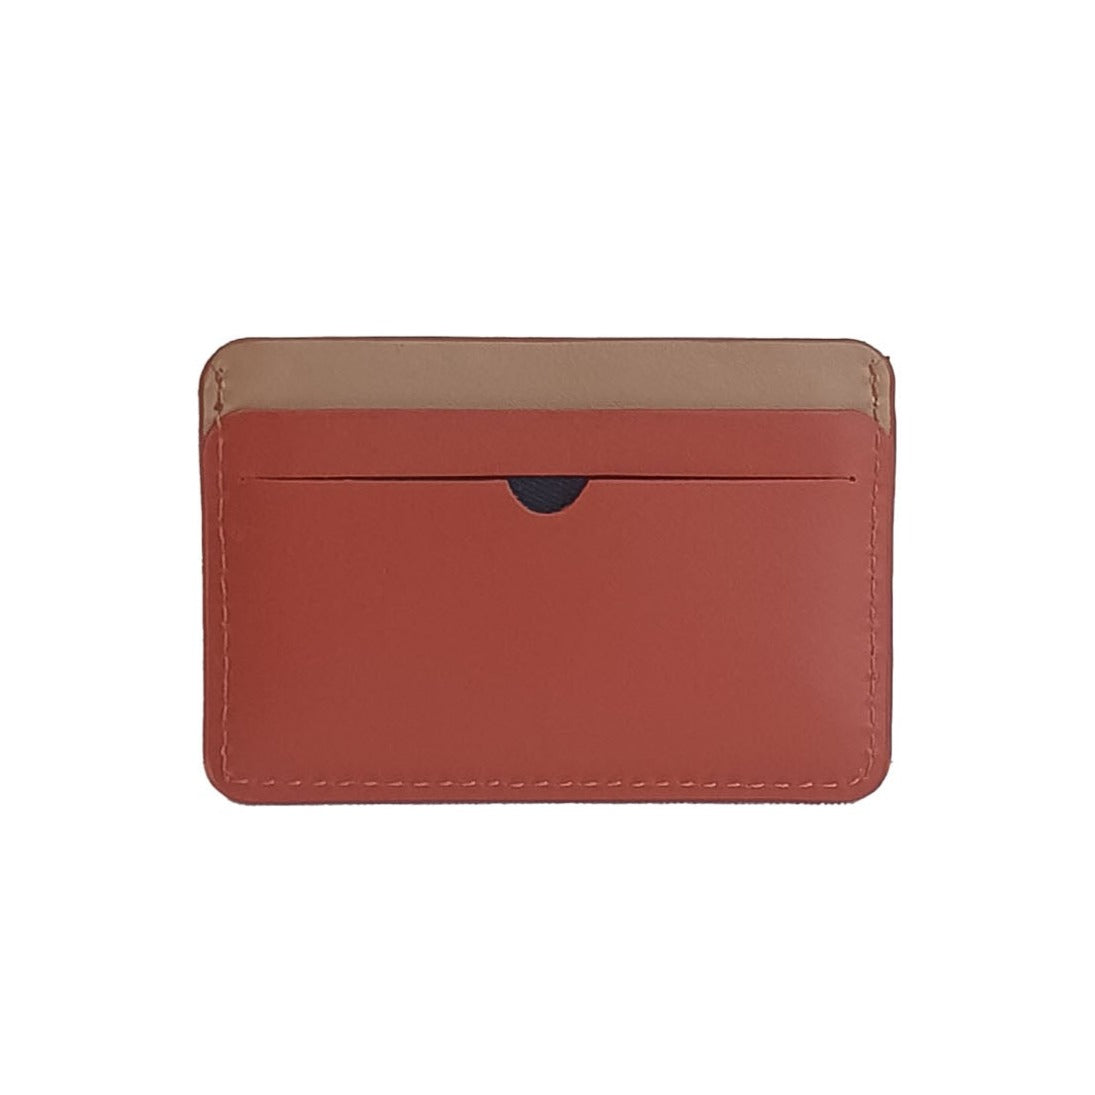 Slim Cardholder in Rust Brown and Sand